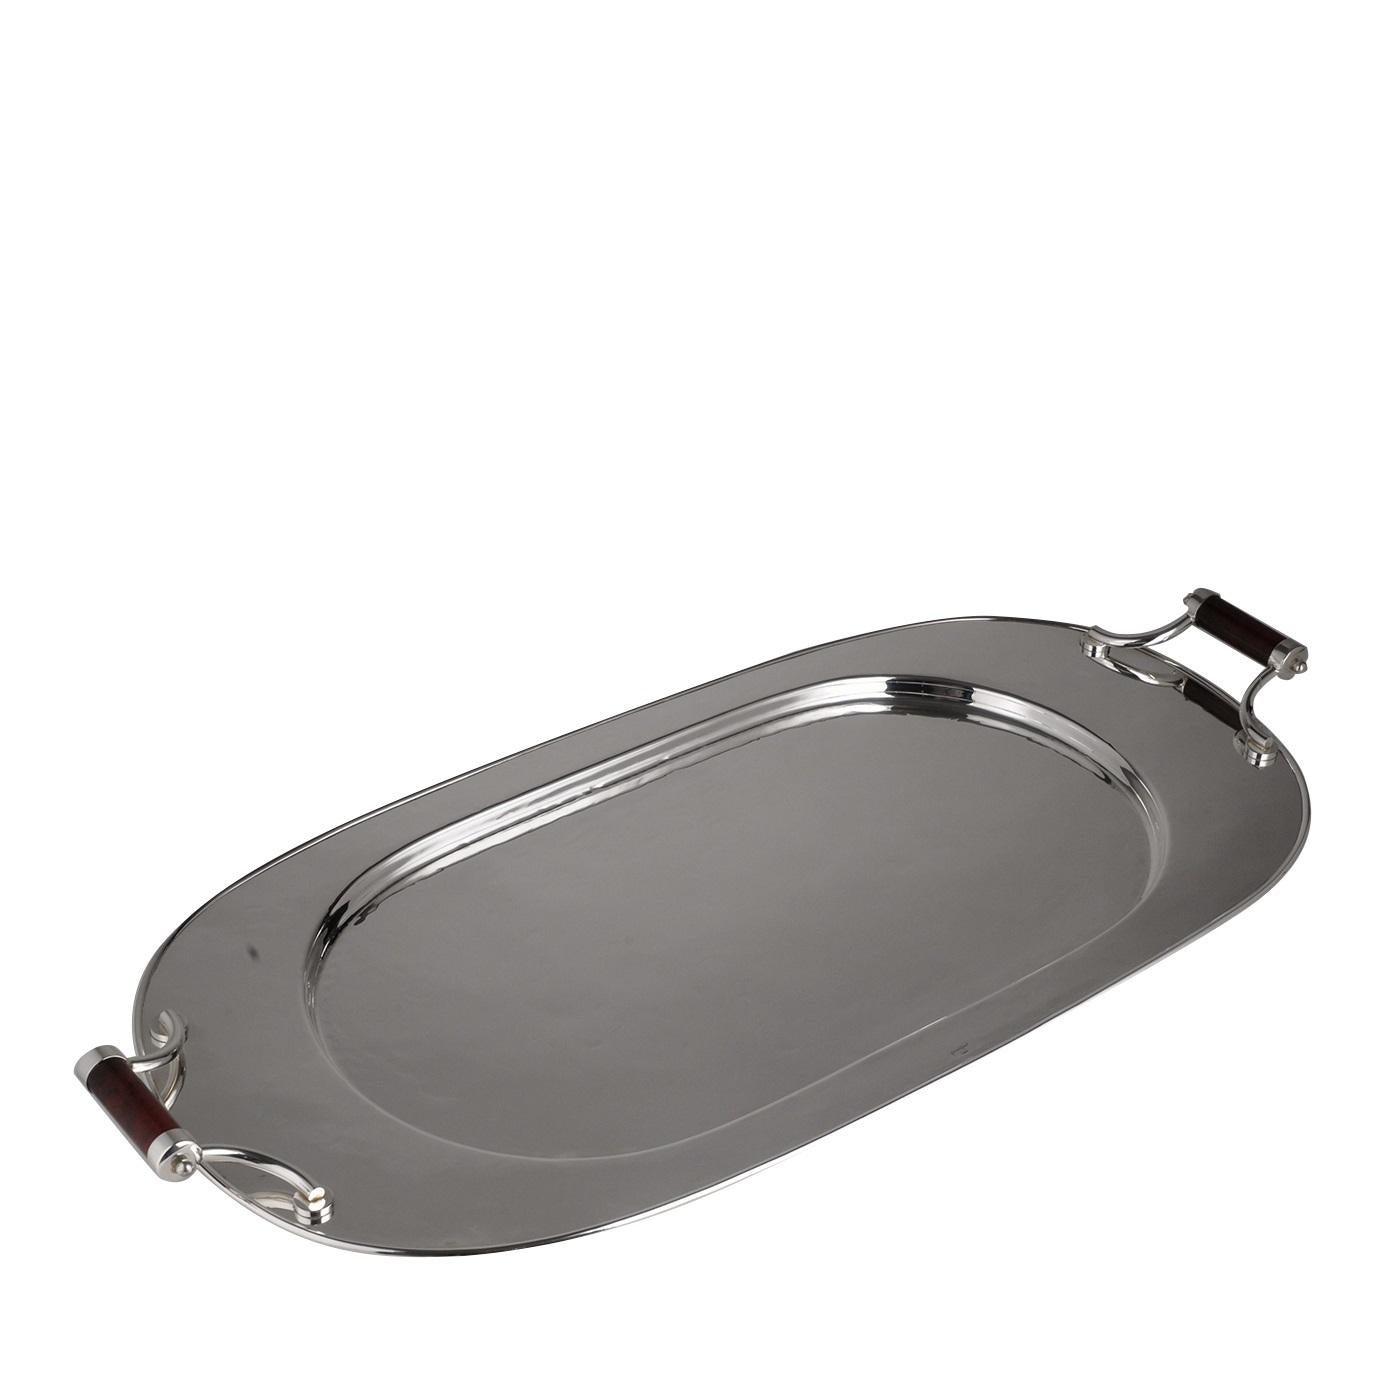 This oval tray is made of metal with a silver plated finish that gives it a cool, precious glow. The Classic design and exquisite craftsmanship make it an ideal object of functional decor in an elegant dining room or living room. The simple but